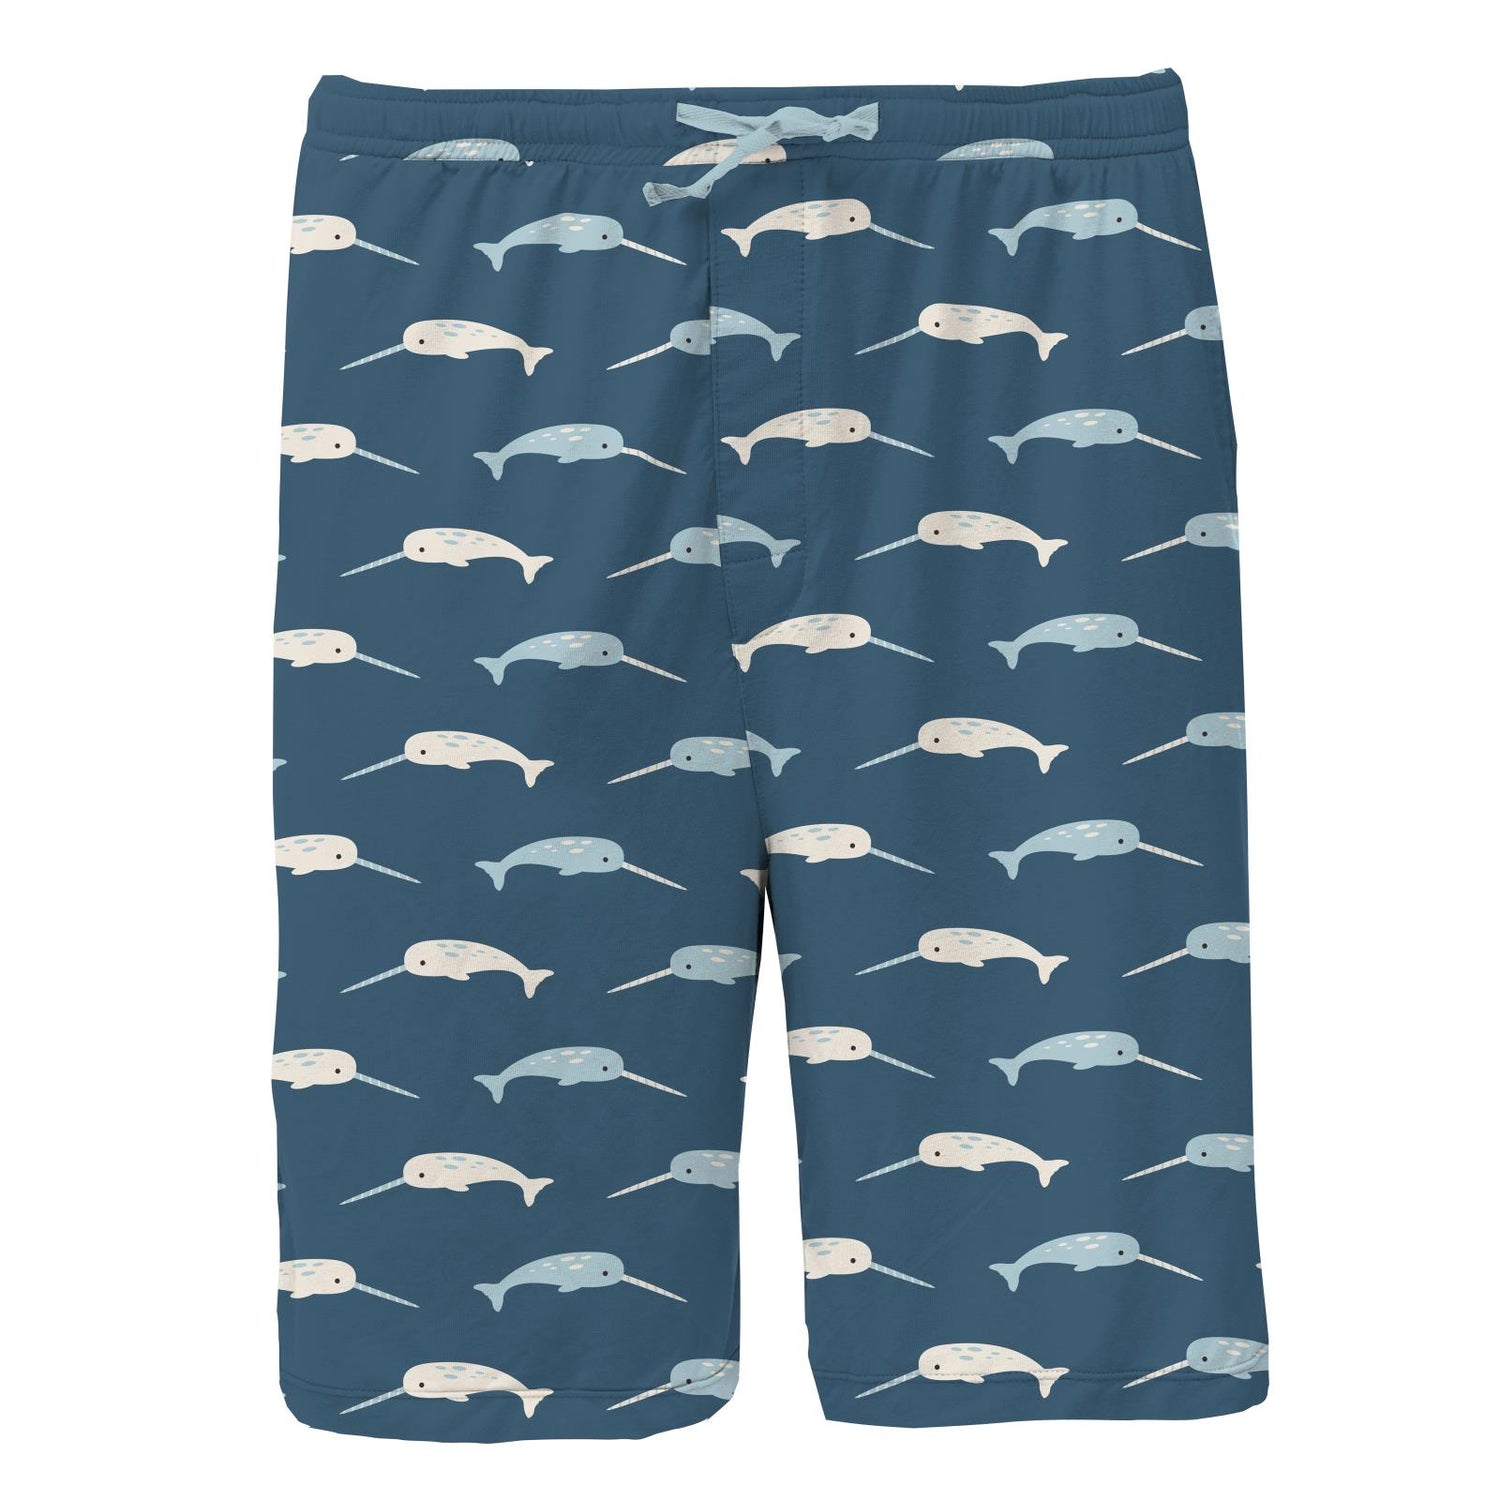 Men's Print Lounge Shorts in Deep Sea Narwhal